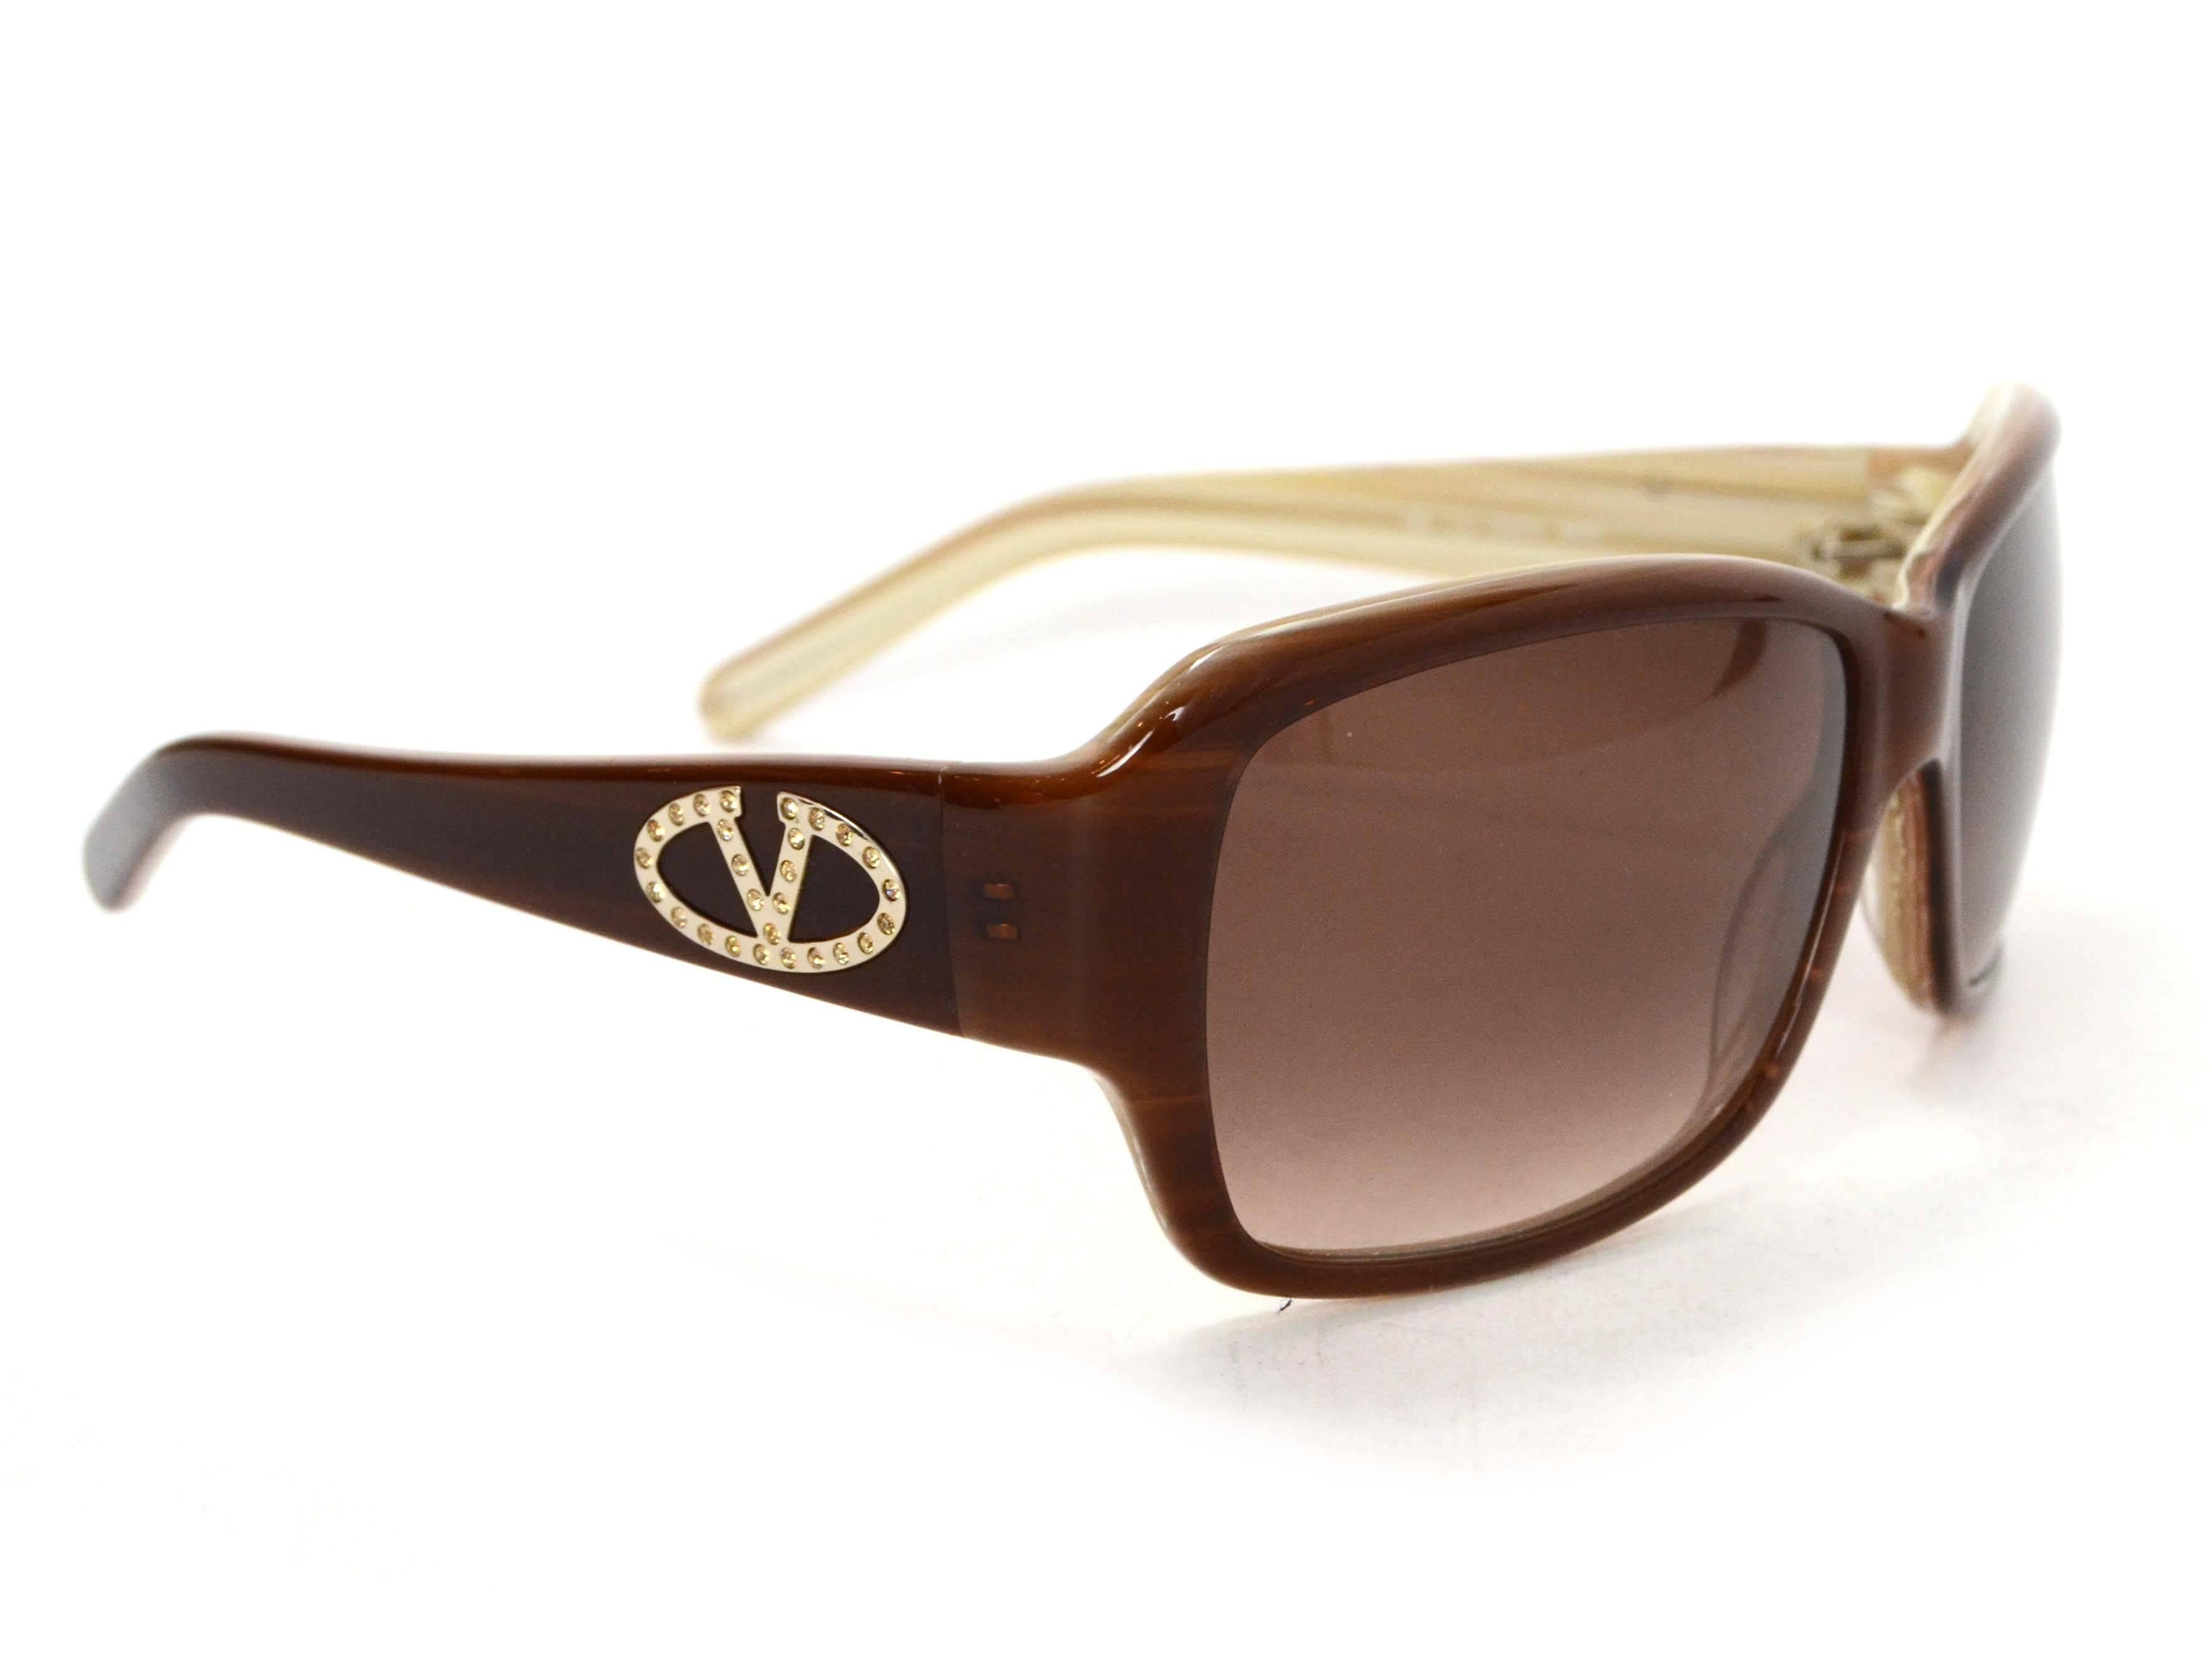 Valentino Brown Square Frame Sunglasses

    Made In: Italy

    Color: Brown, tan

    Materials: Resin, rhinestone

    Overall Condition: Excellent pre owned condition

    Includes: Valentino case

Measurements

Length Across: